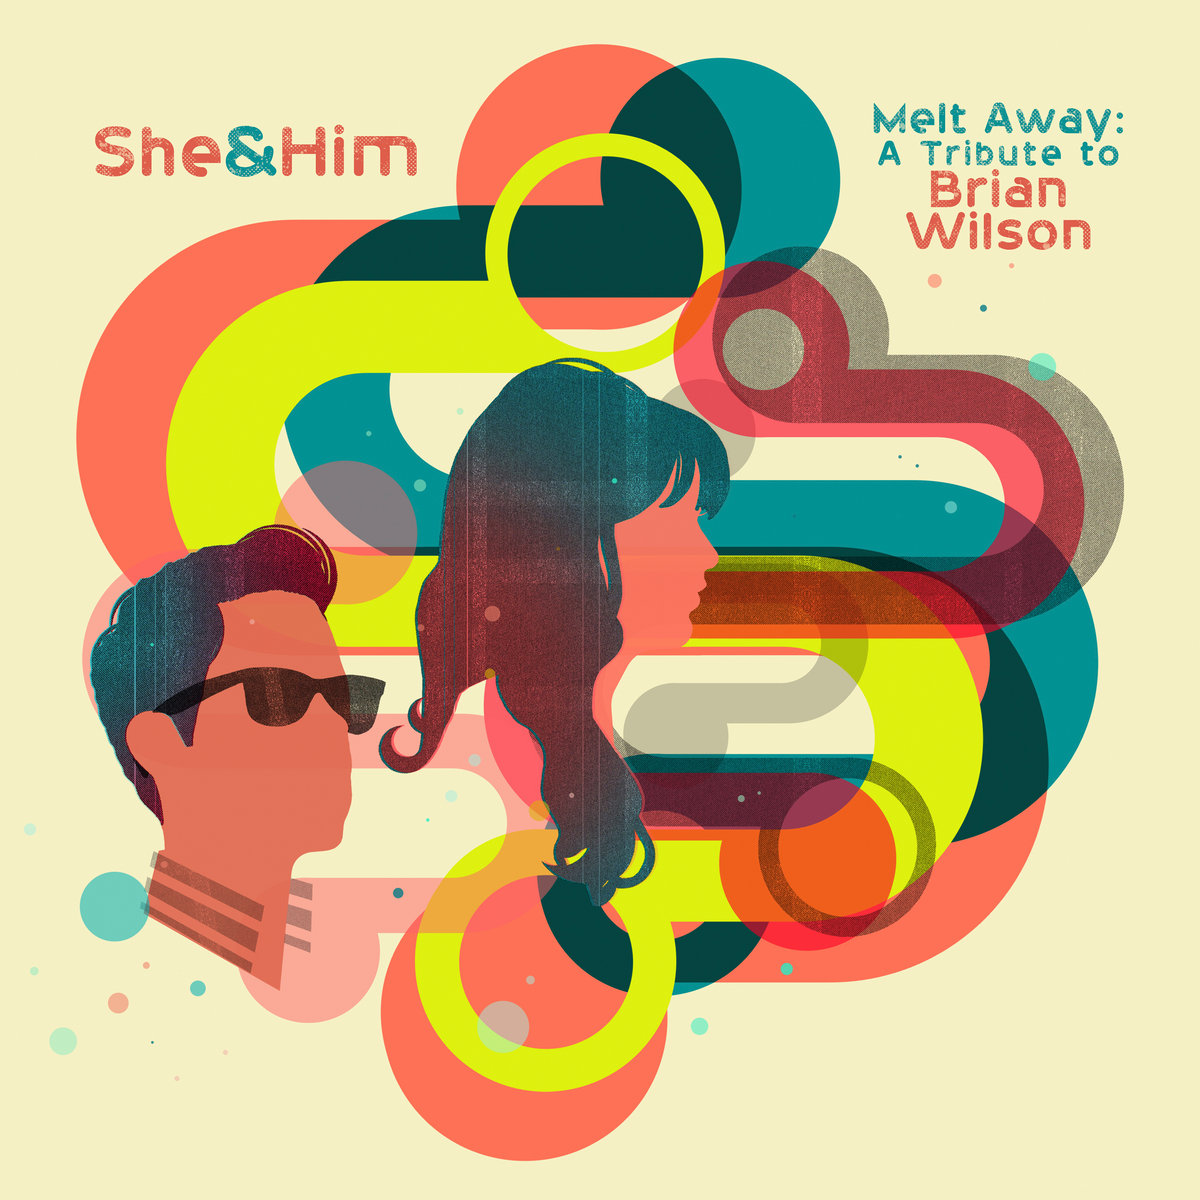 She & Him "Melt Away: A Tribute to Brian Wilson" Colored LP